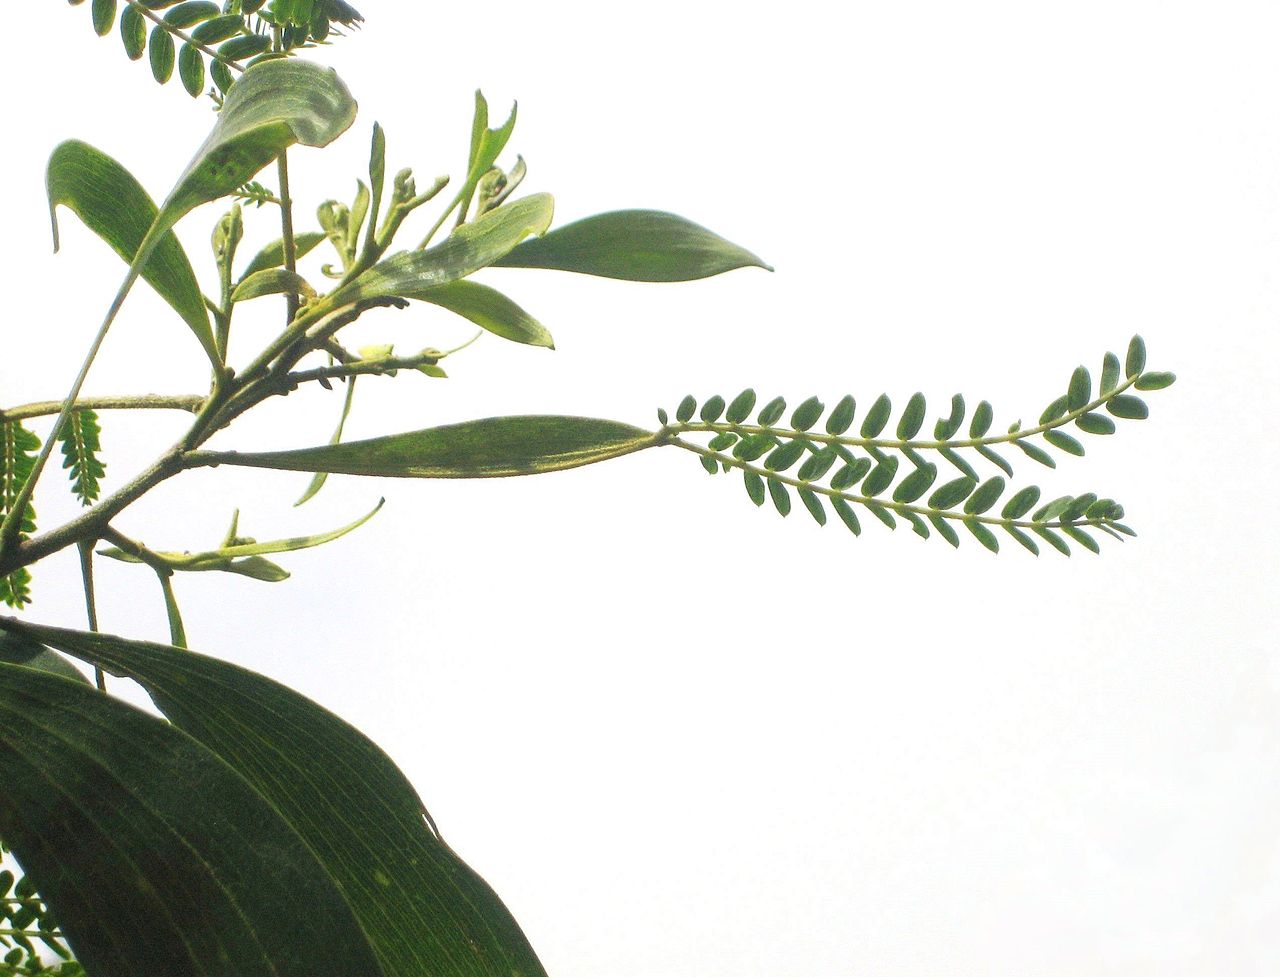 An Acacia phyllode is a flattened, wide petiole. A compound leaf emerges from the phyllode.